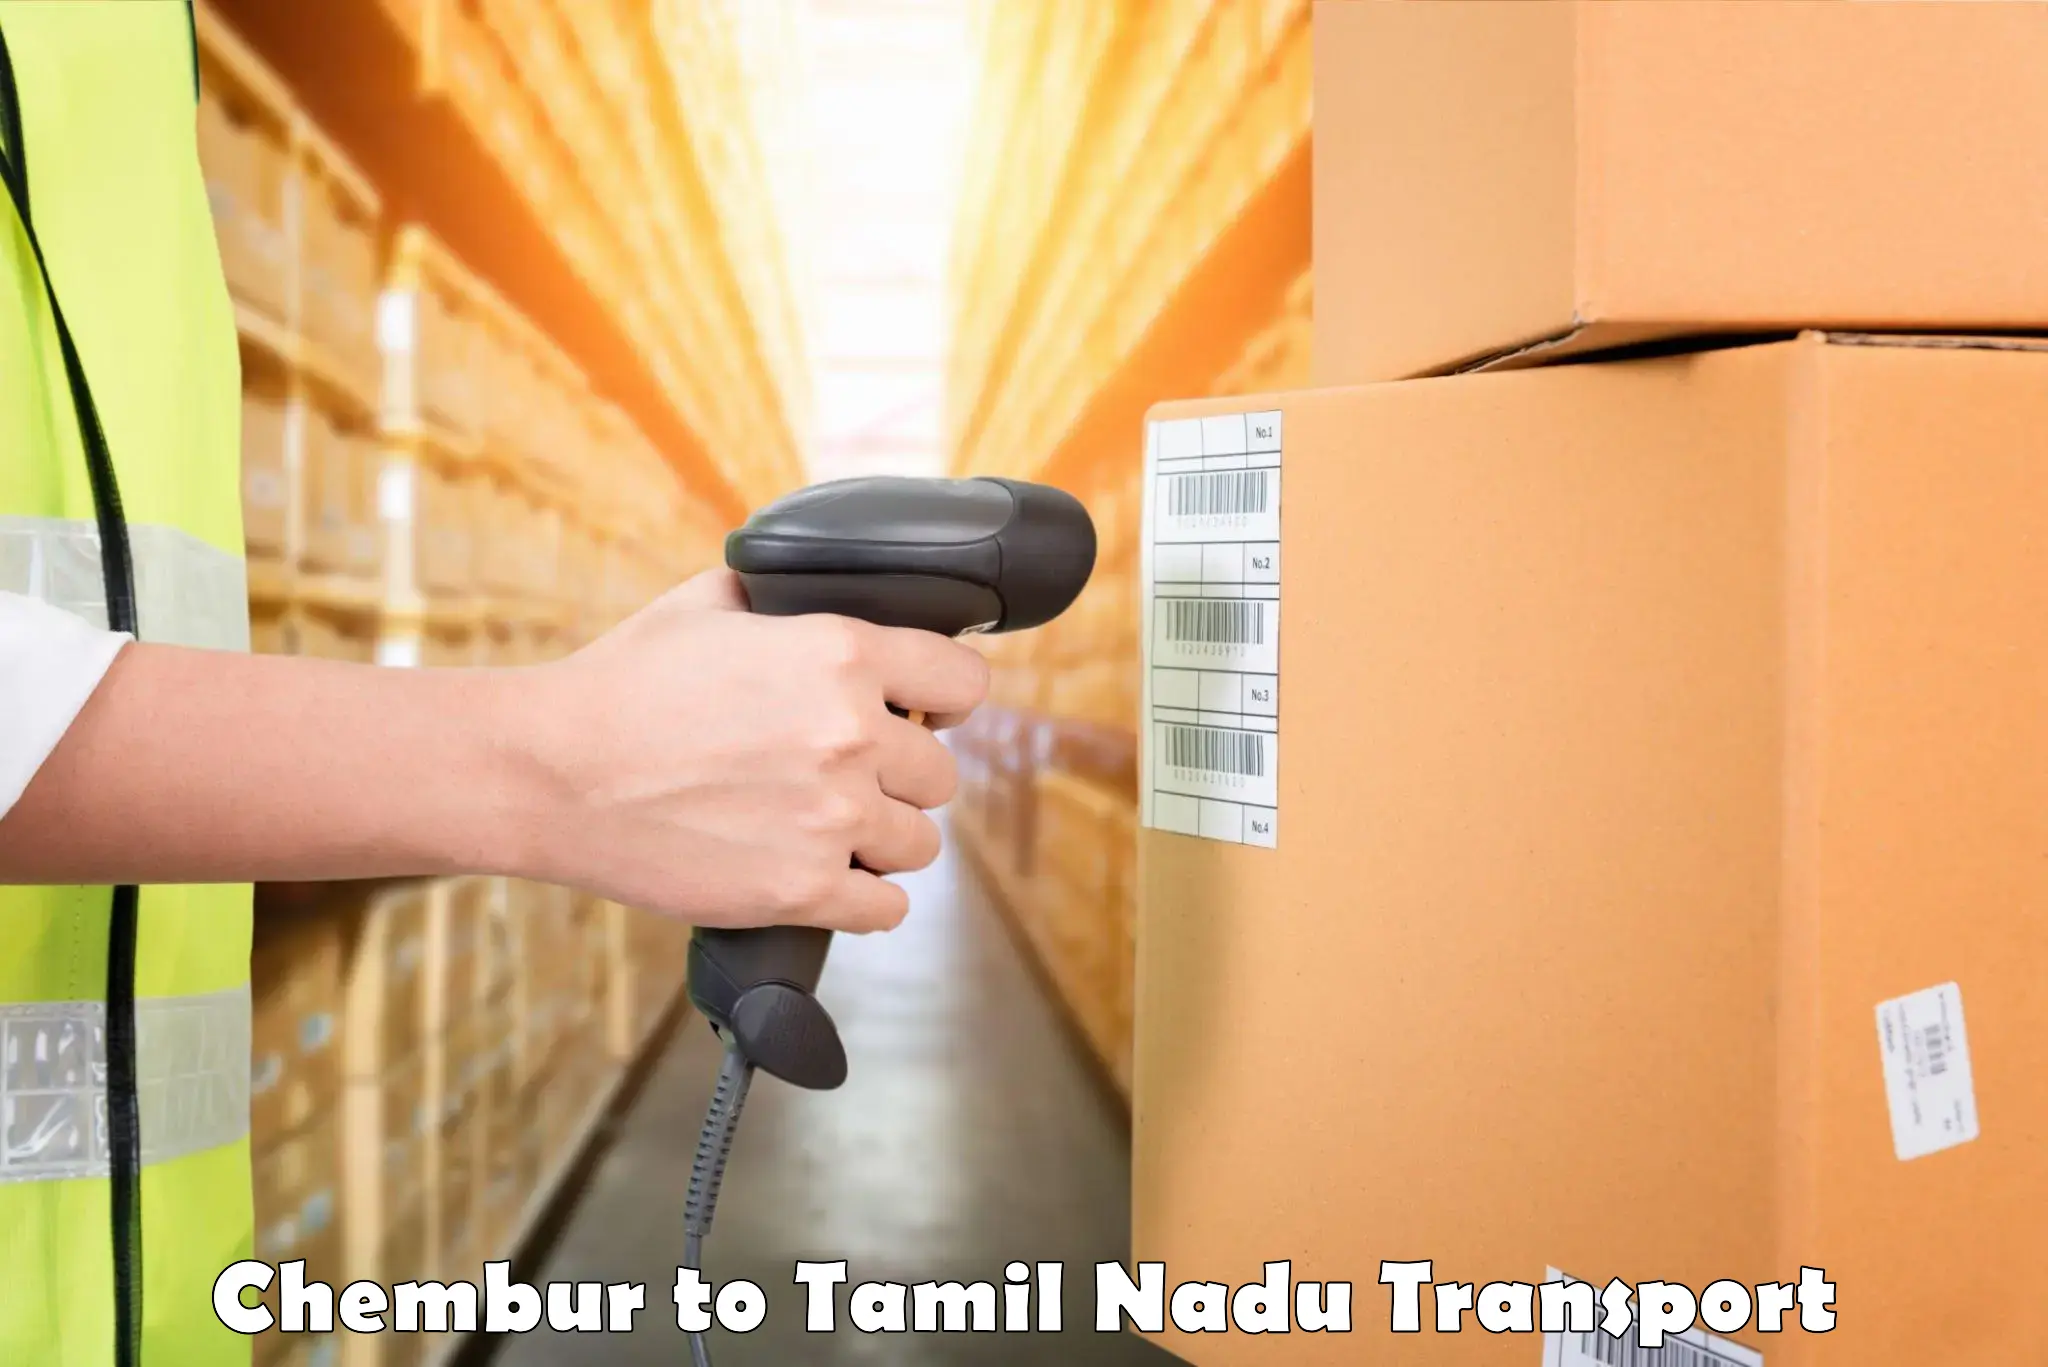 Goods transport services in Chembur to Chennai